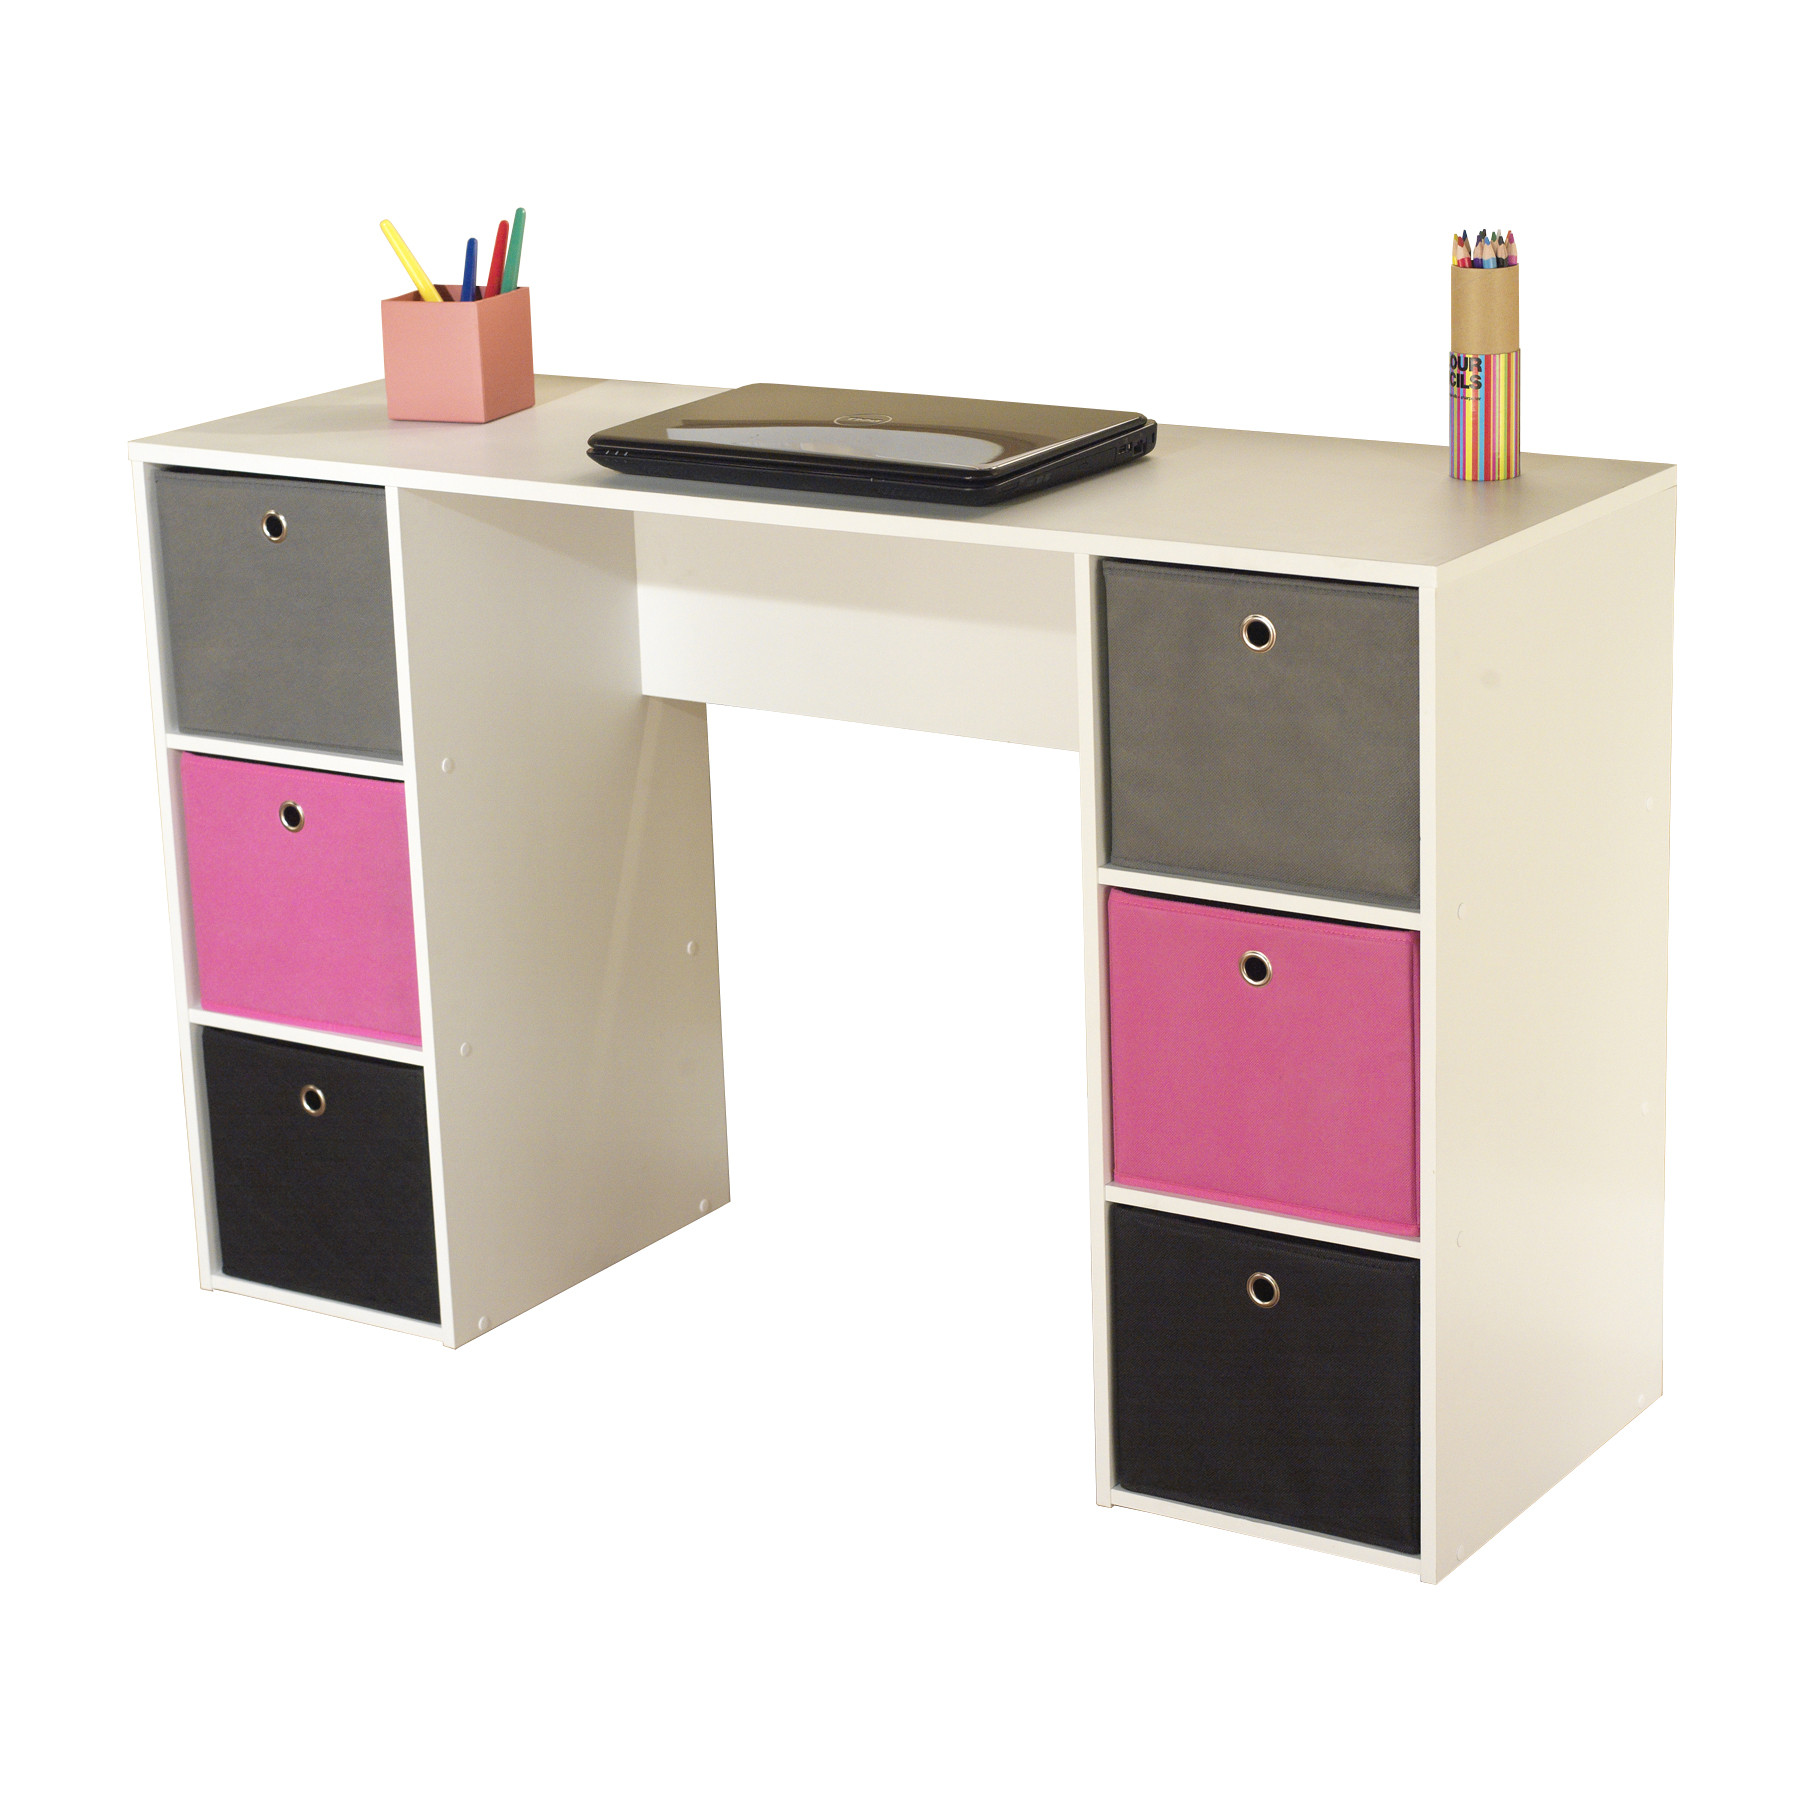 Children'S Desk With Storage
 Kids Desk with Six Fabric Storage Bins Multiple Colors